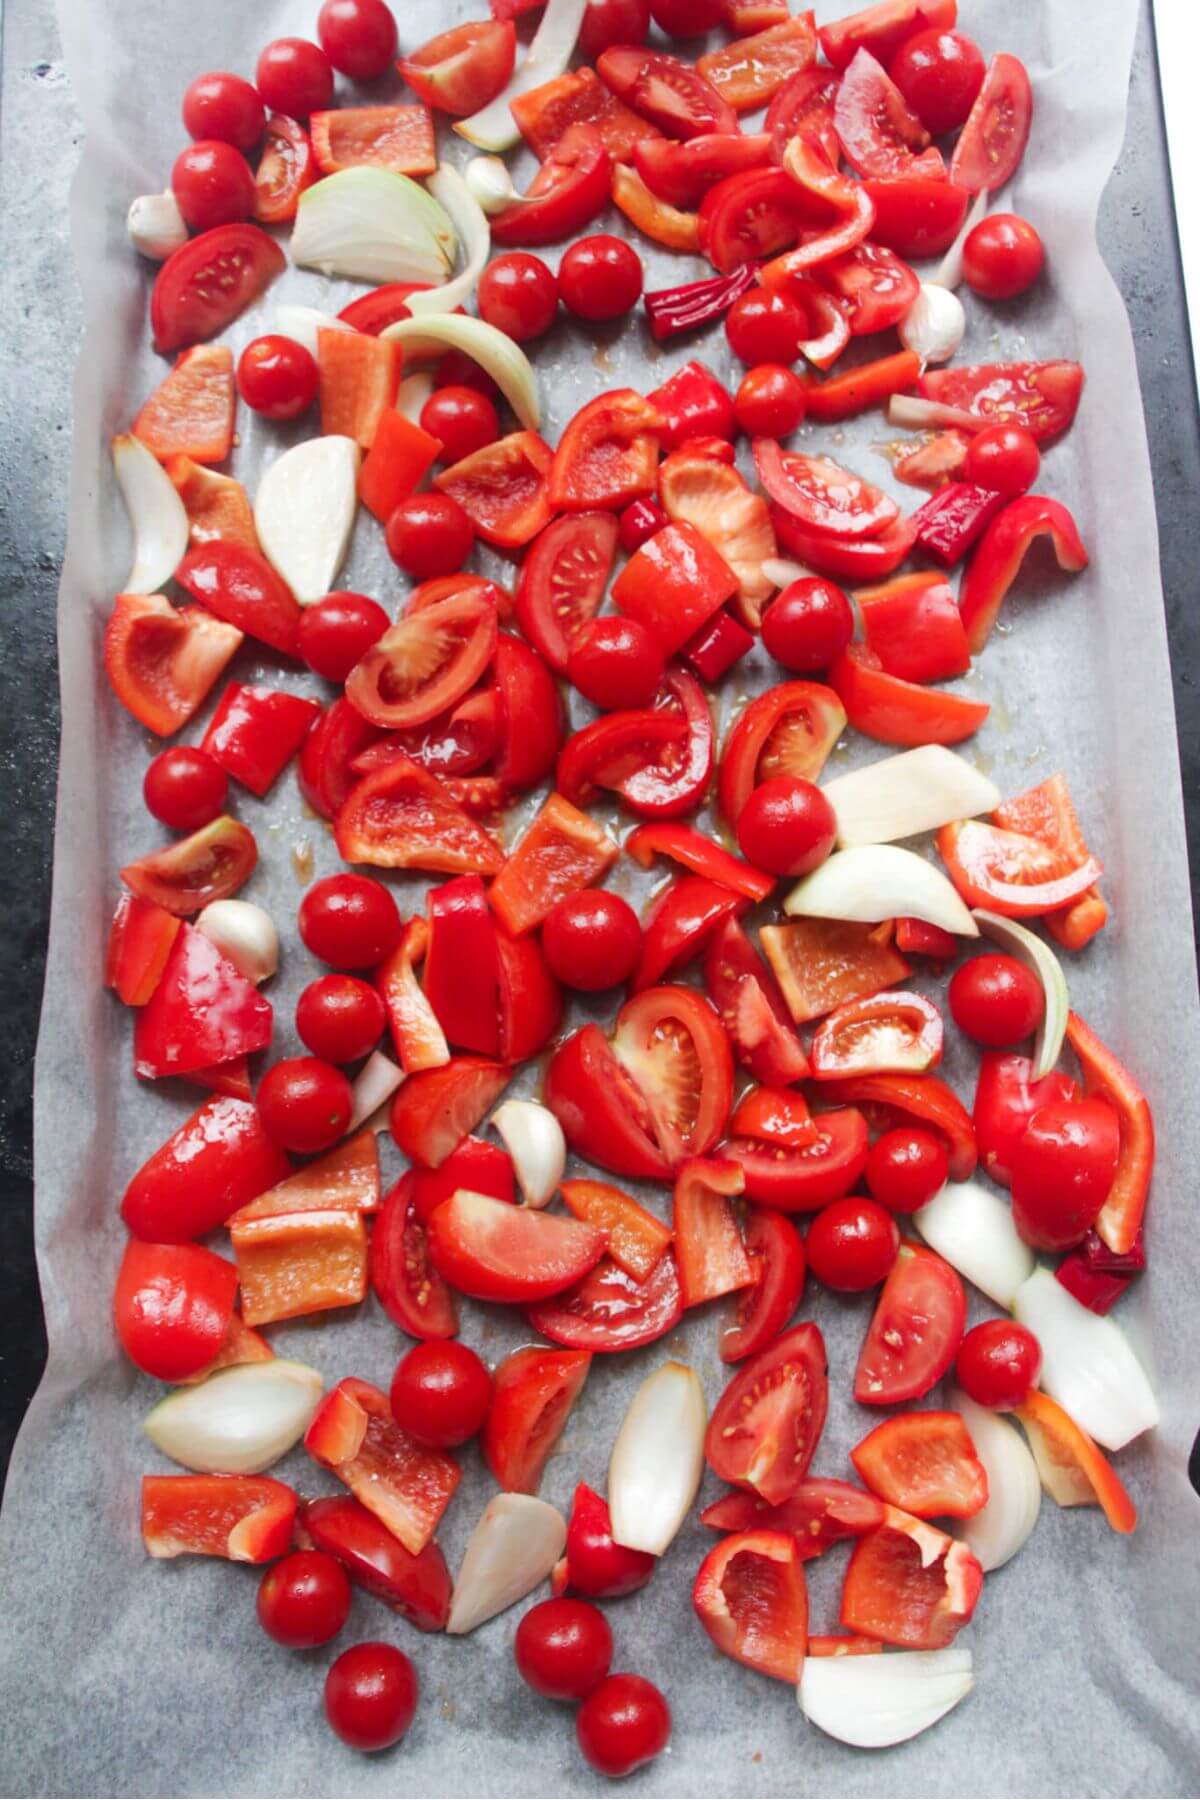 Chopped tomatoes, red pepper, onion and garlic laid out on a large lined oven tray.